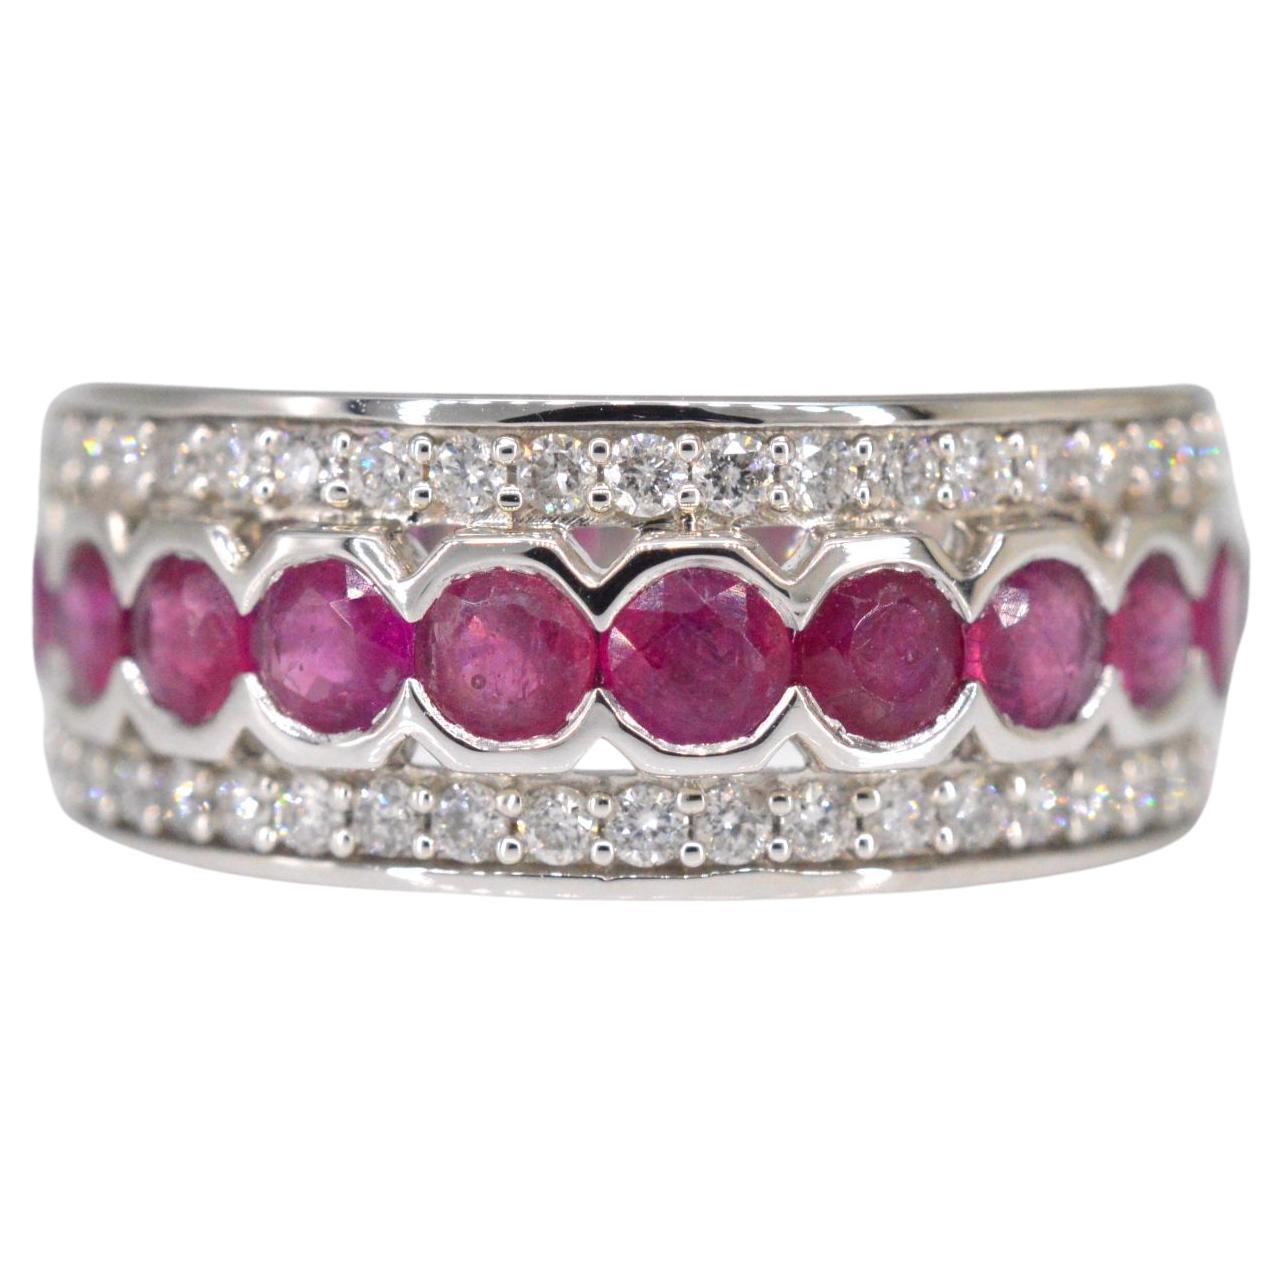 White gold pave ring with diamonds and ruby